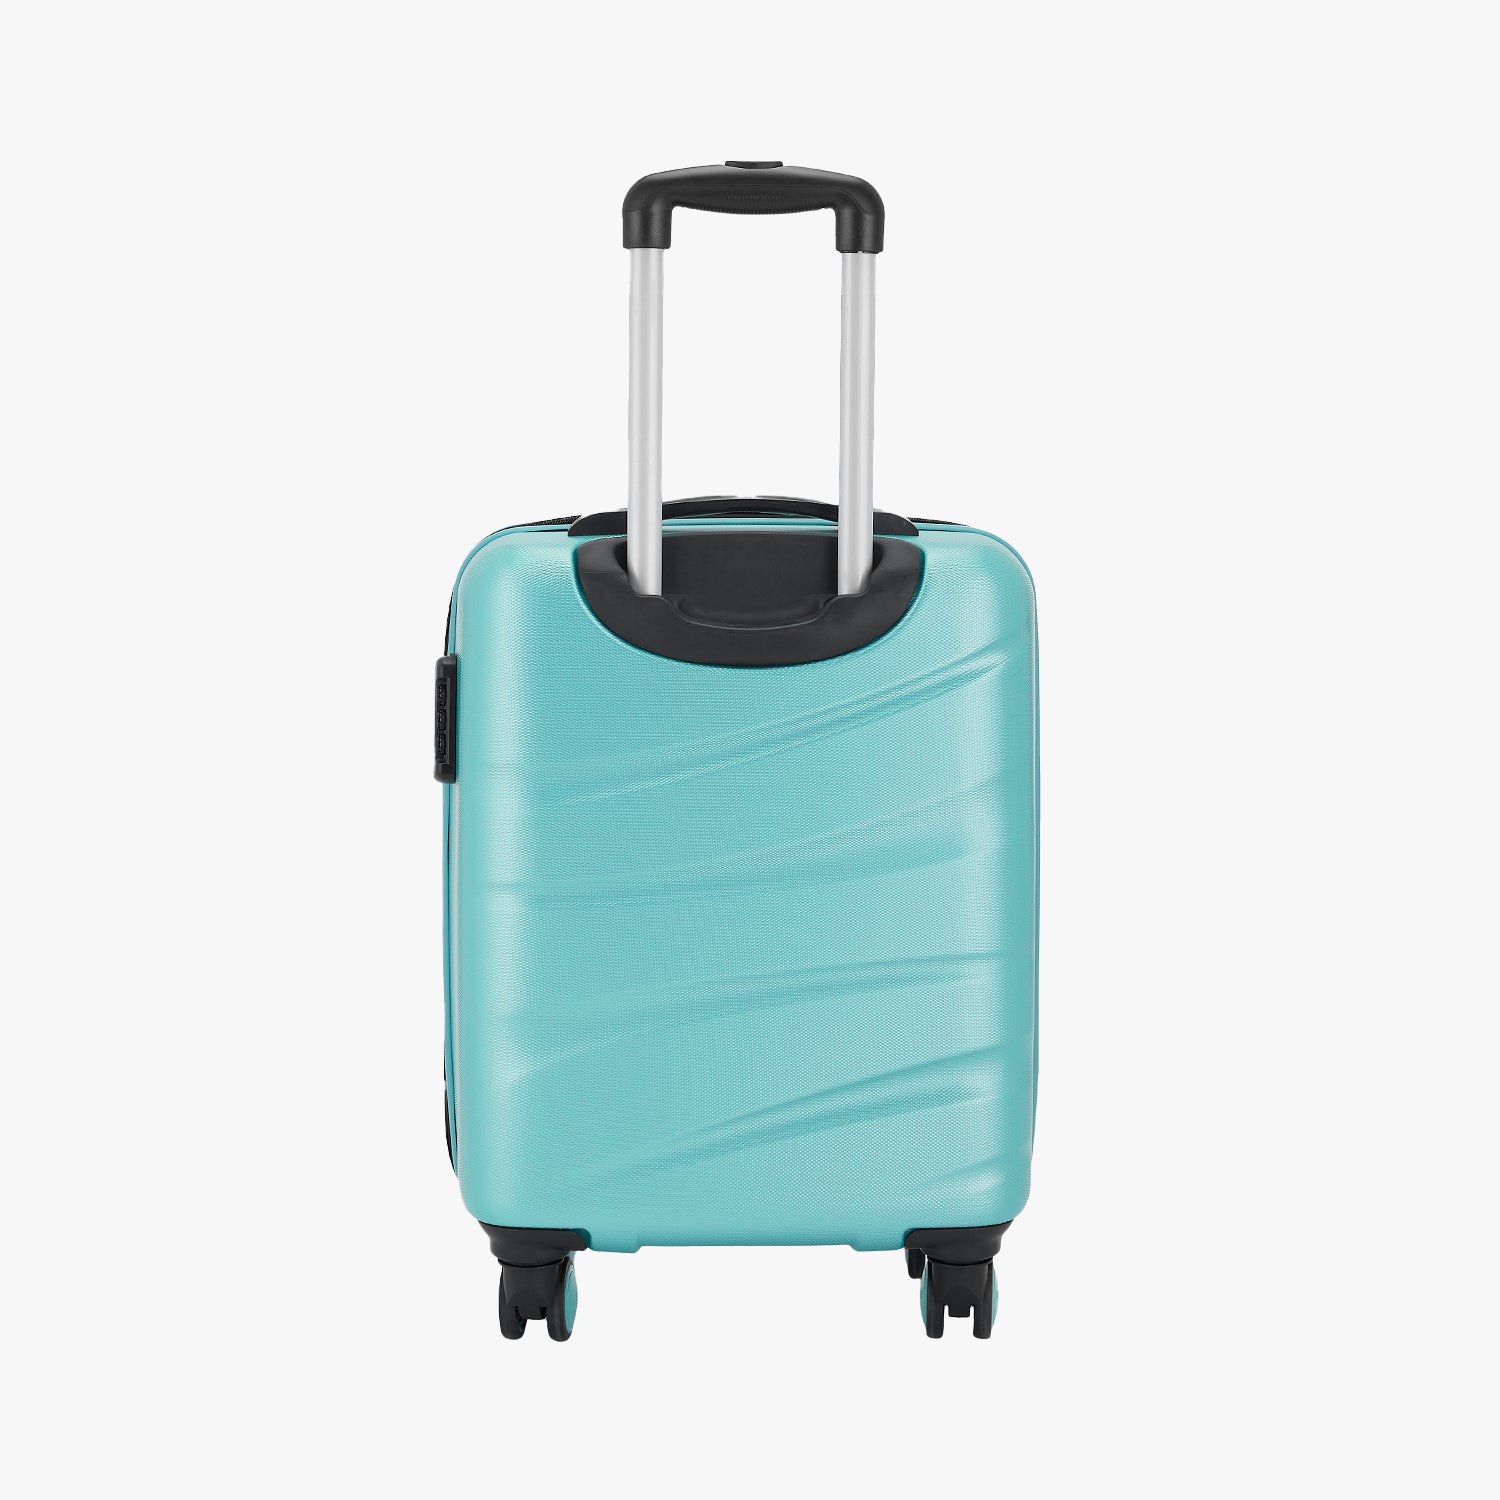 Persia Hard Luggage with Dual Wheels - Spearmint